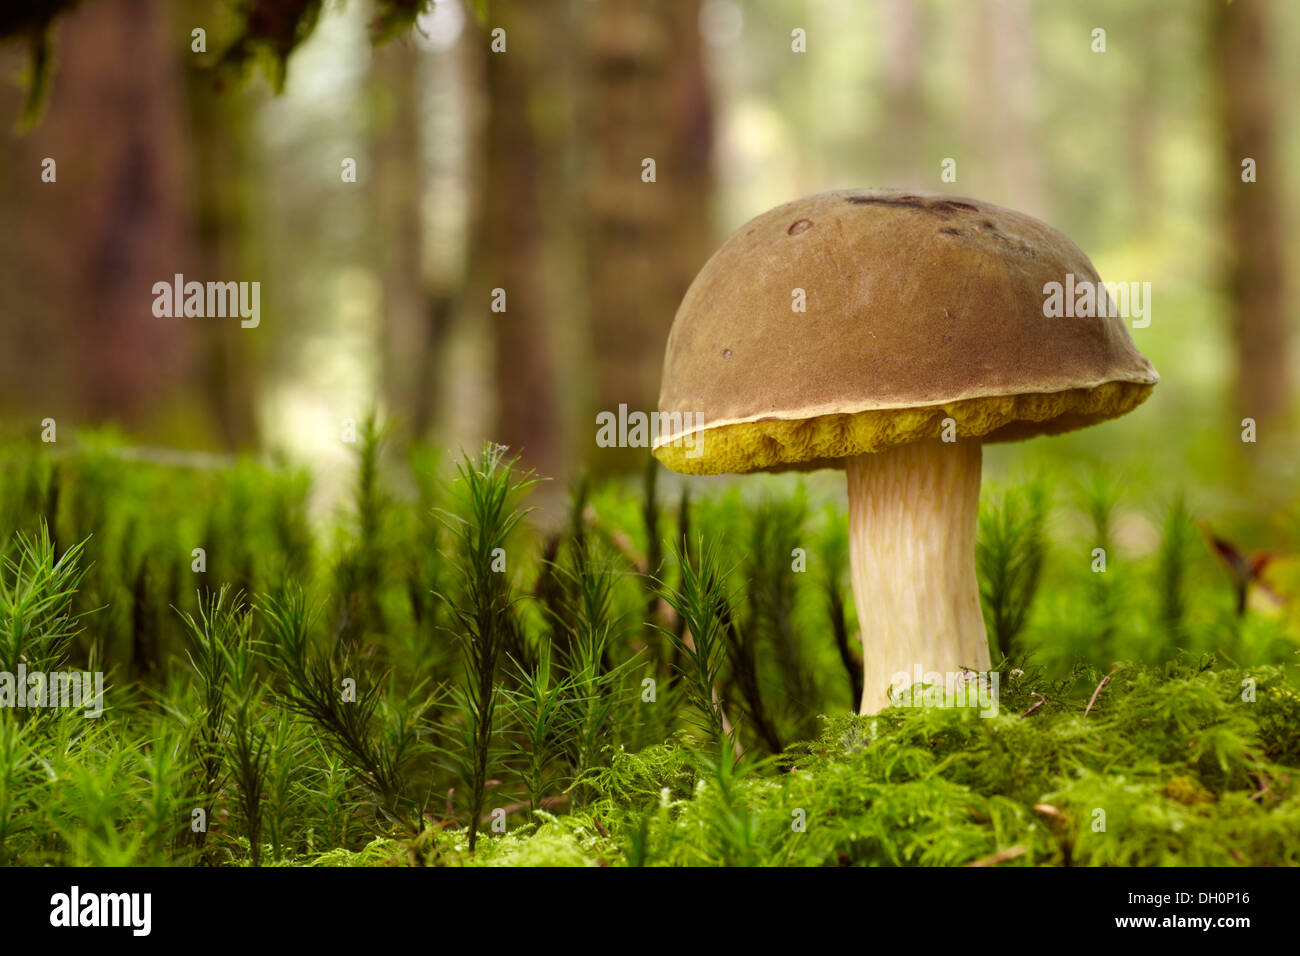 Boletus mushroom growing in a mossy pine forest, Brecon Beacons. Stock Photo